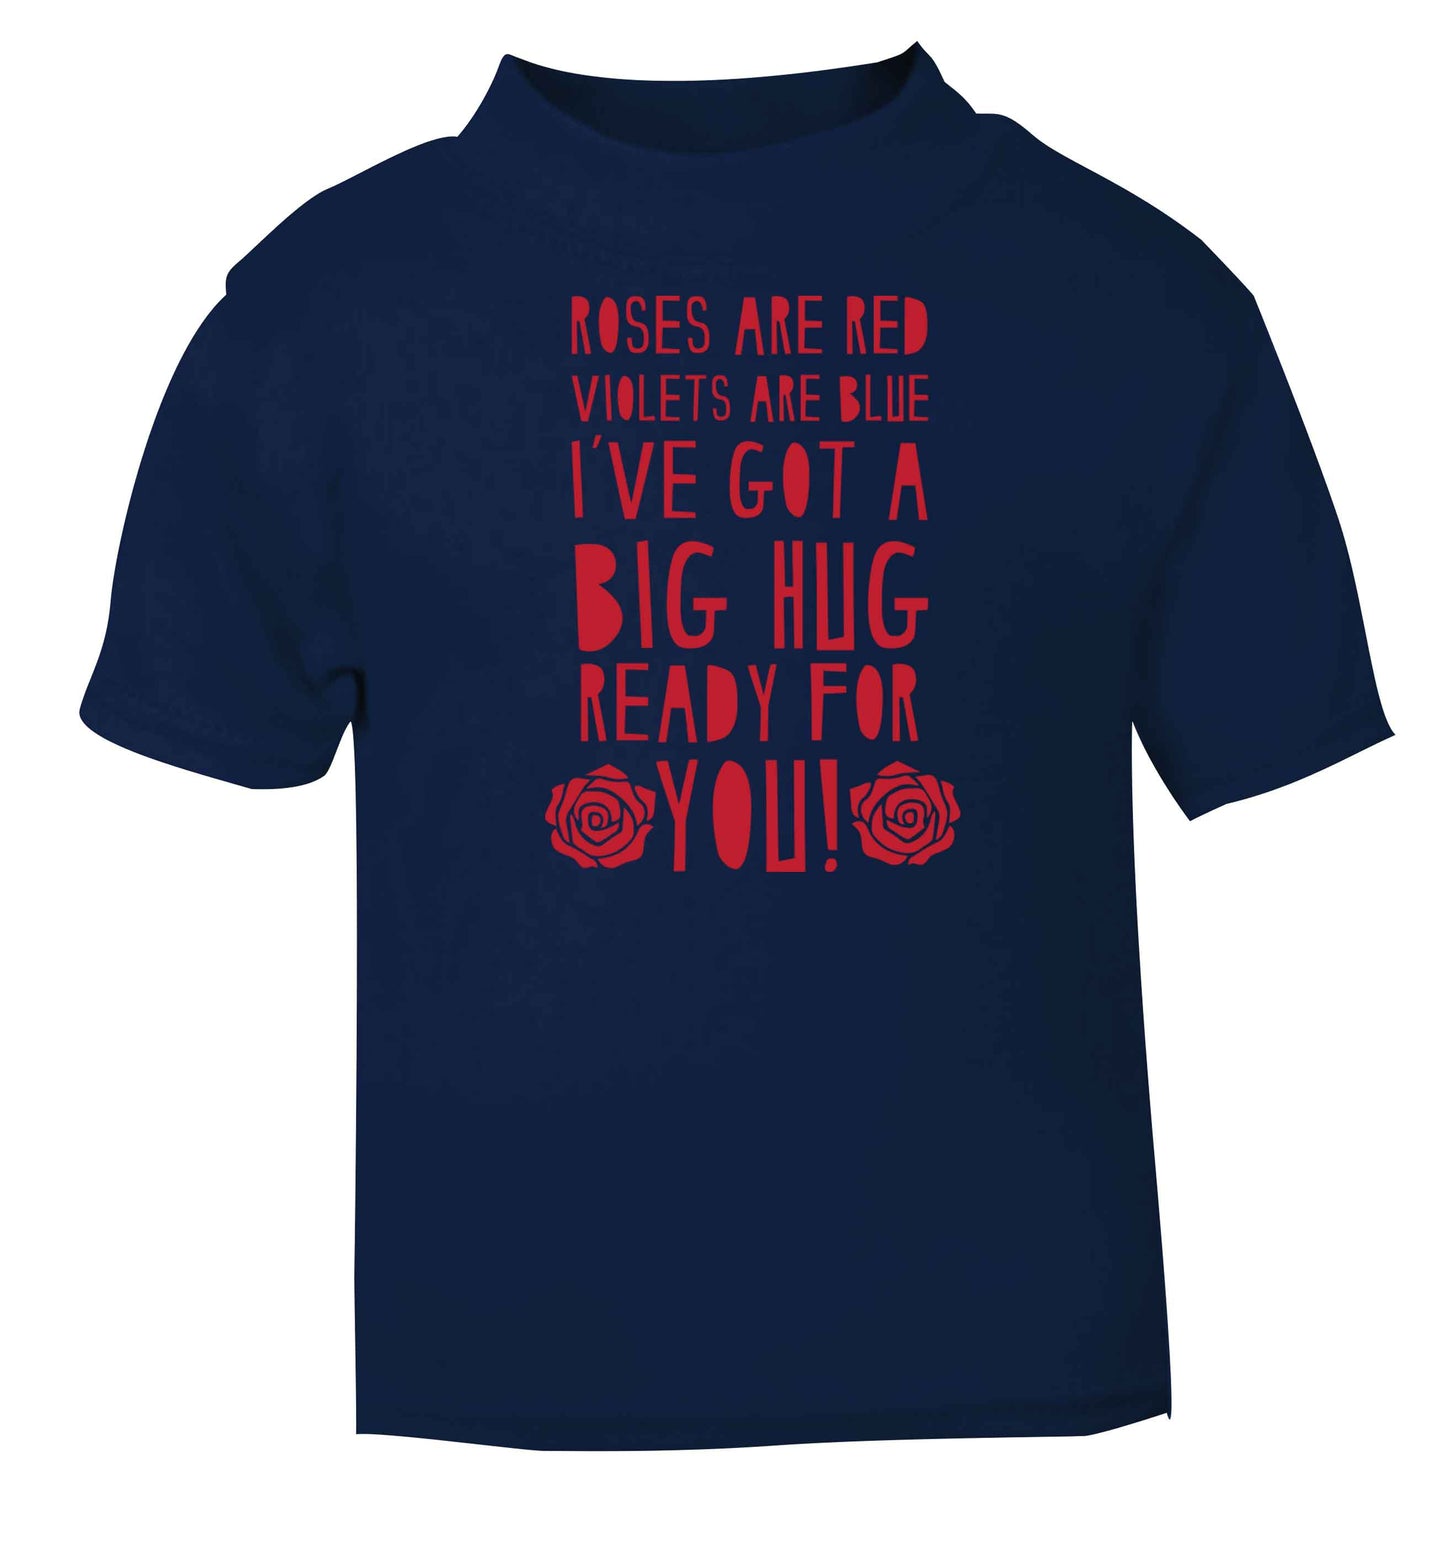 Roses are red violets are blue I've got a big hug coming for you navy baby toddler Tshirt 2 Years